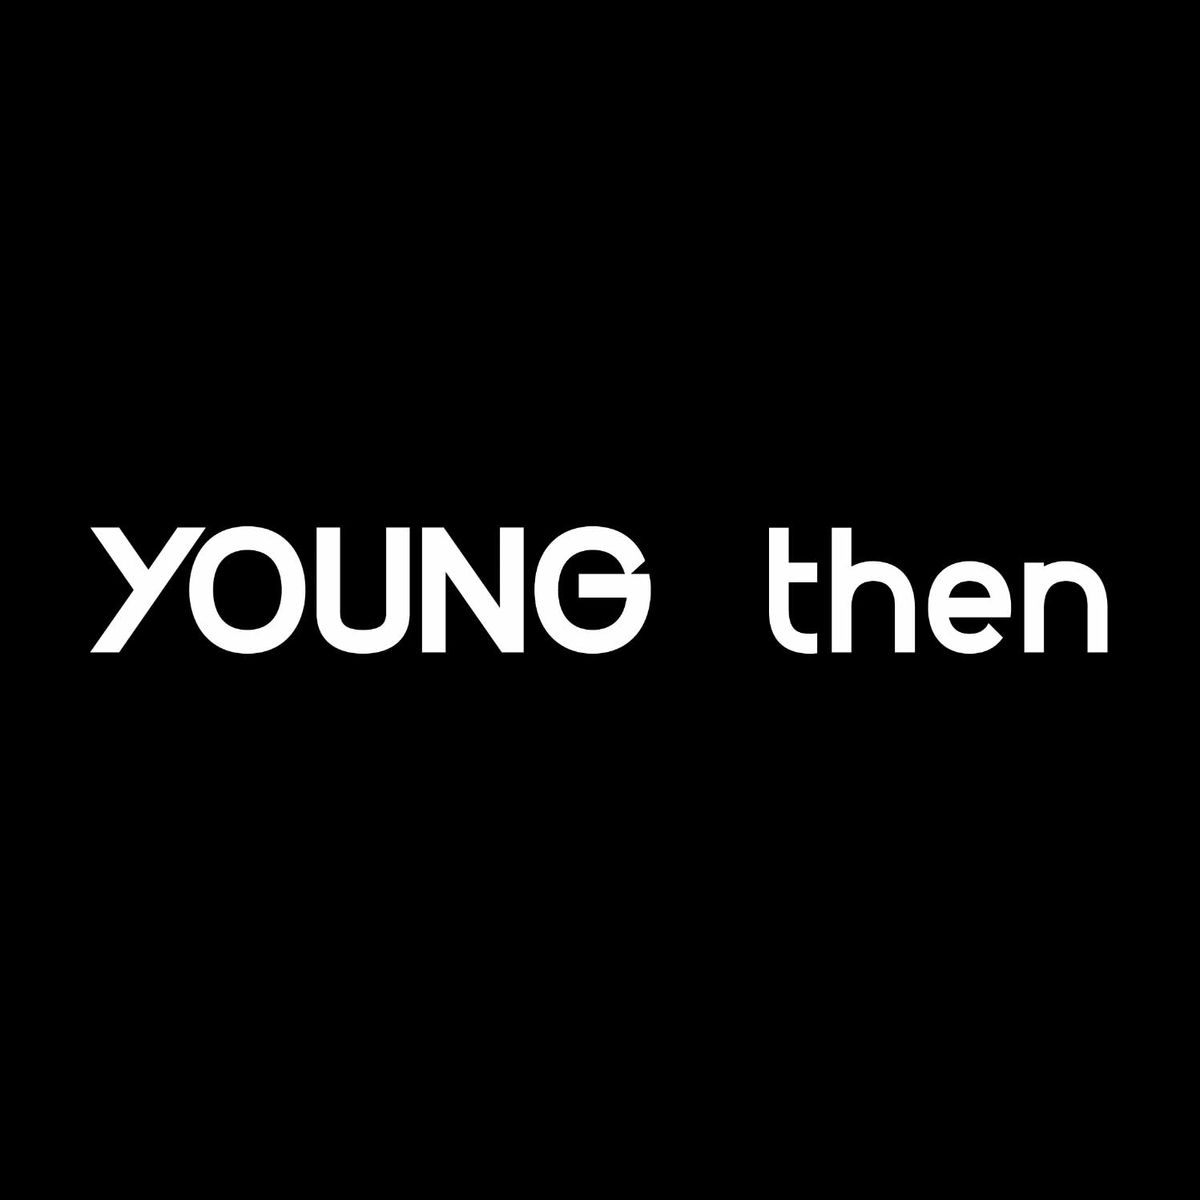 A History of Youth